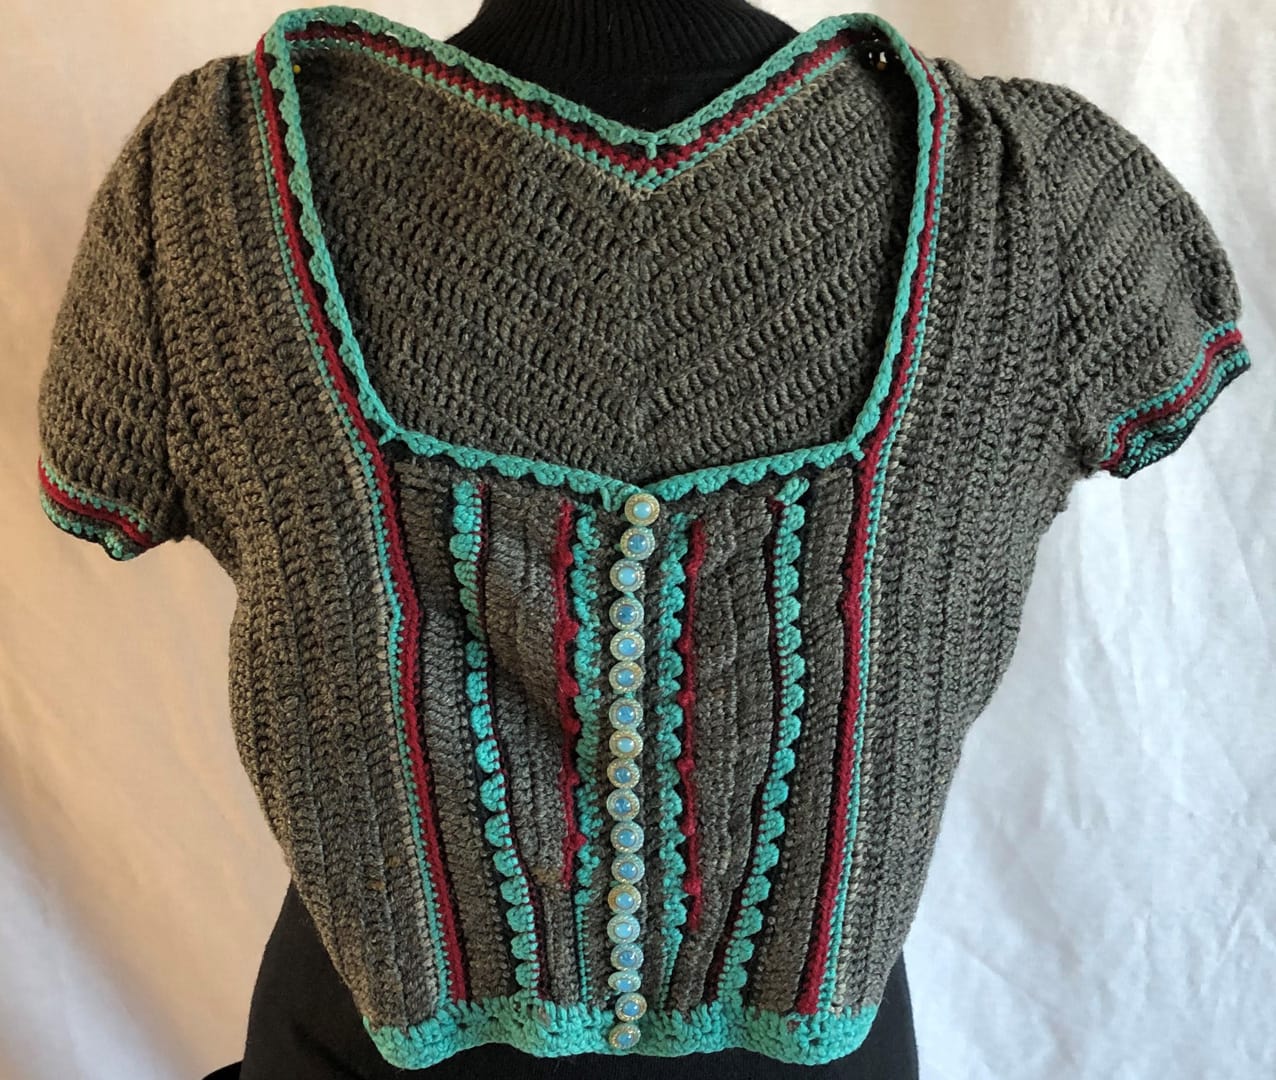 Crocheted pullover sweater, teal detail on dark gray